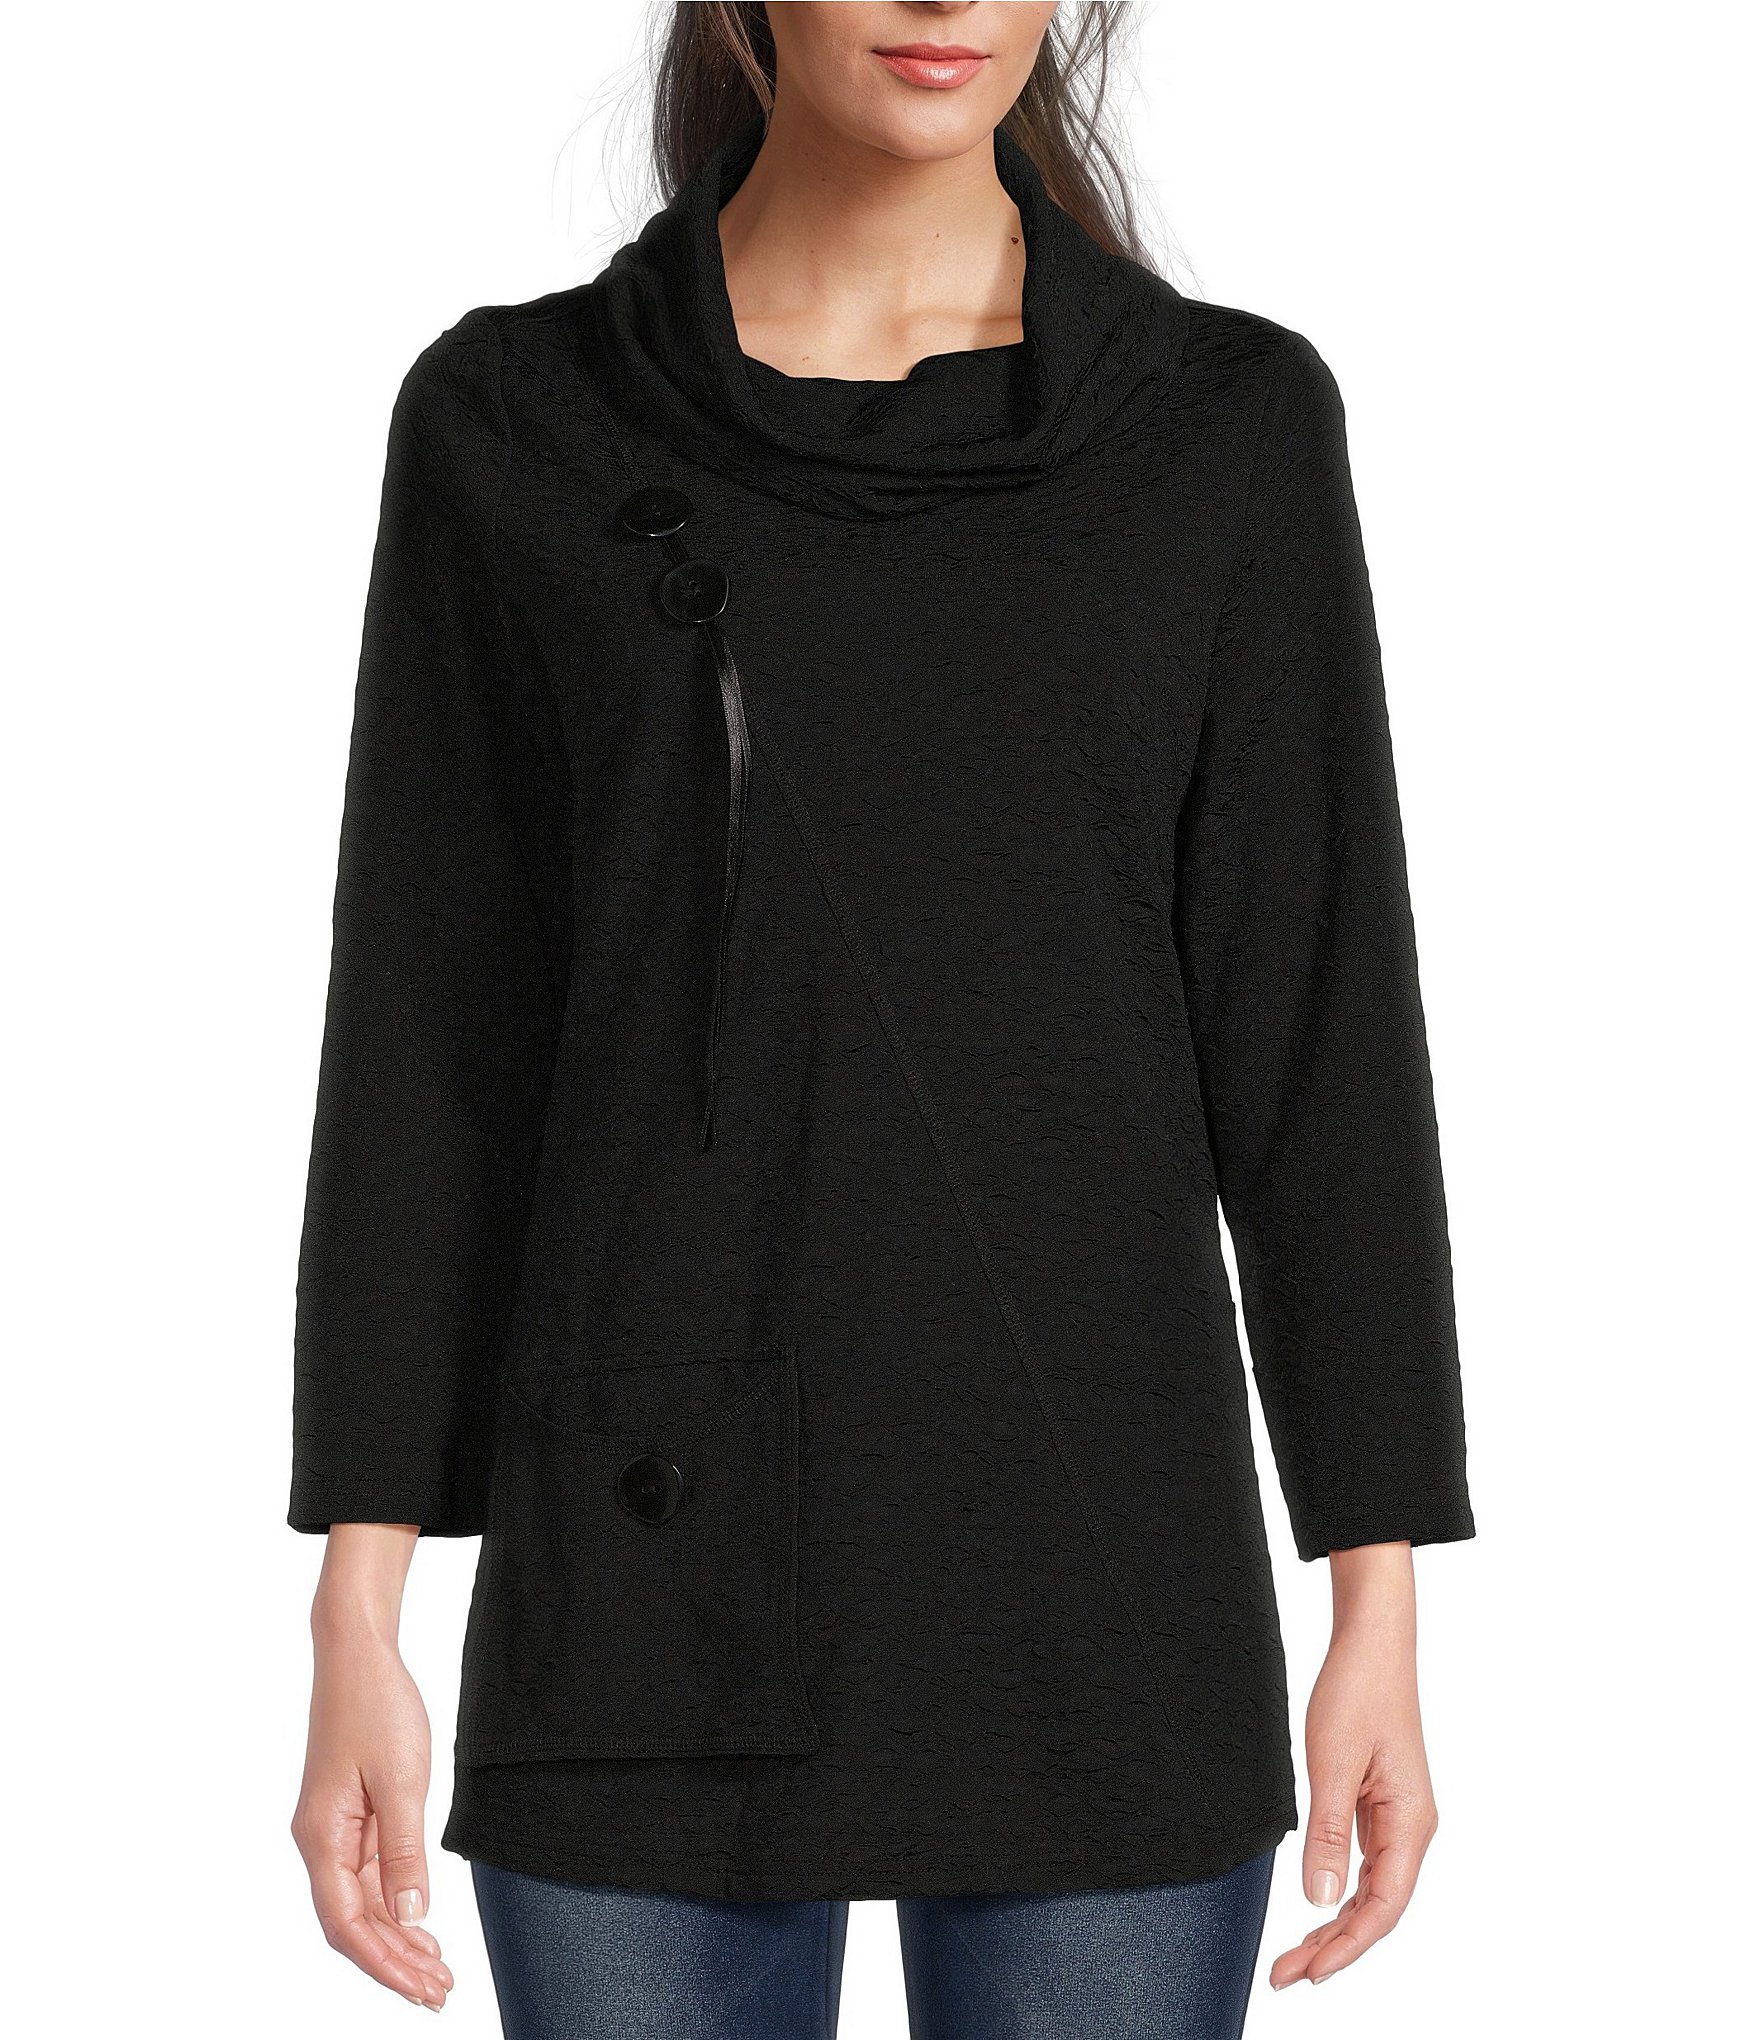 Calessa Texture Popcorn Knit Cowl Neck 3/4 Sleeve Patch Pocket Tunic ...